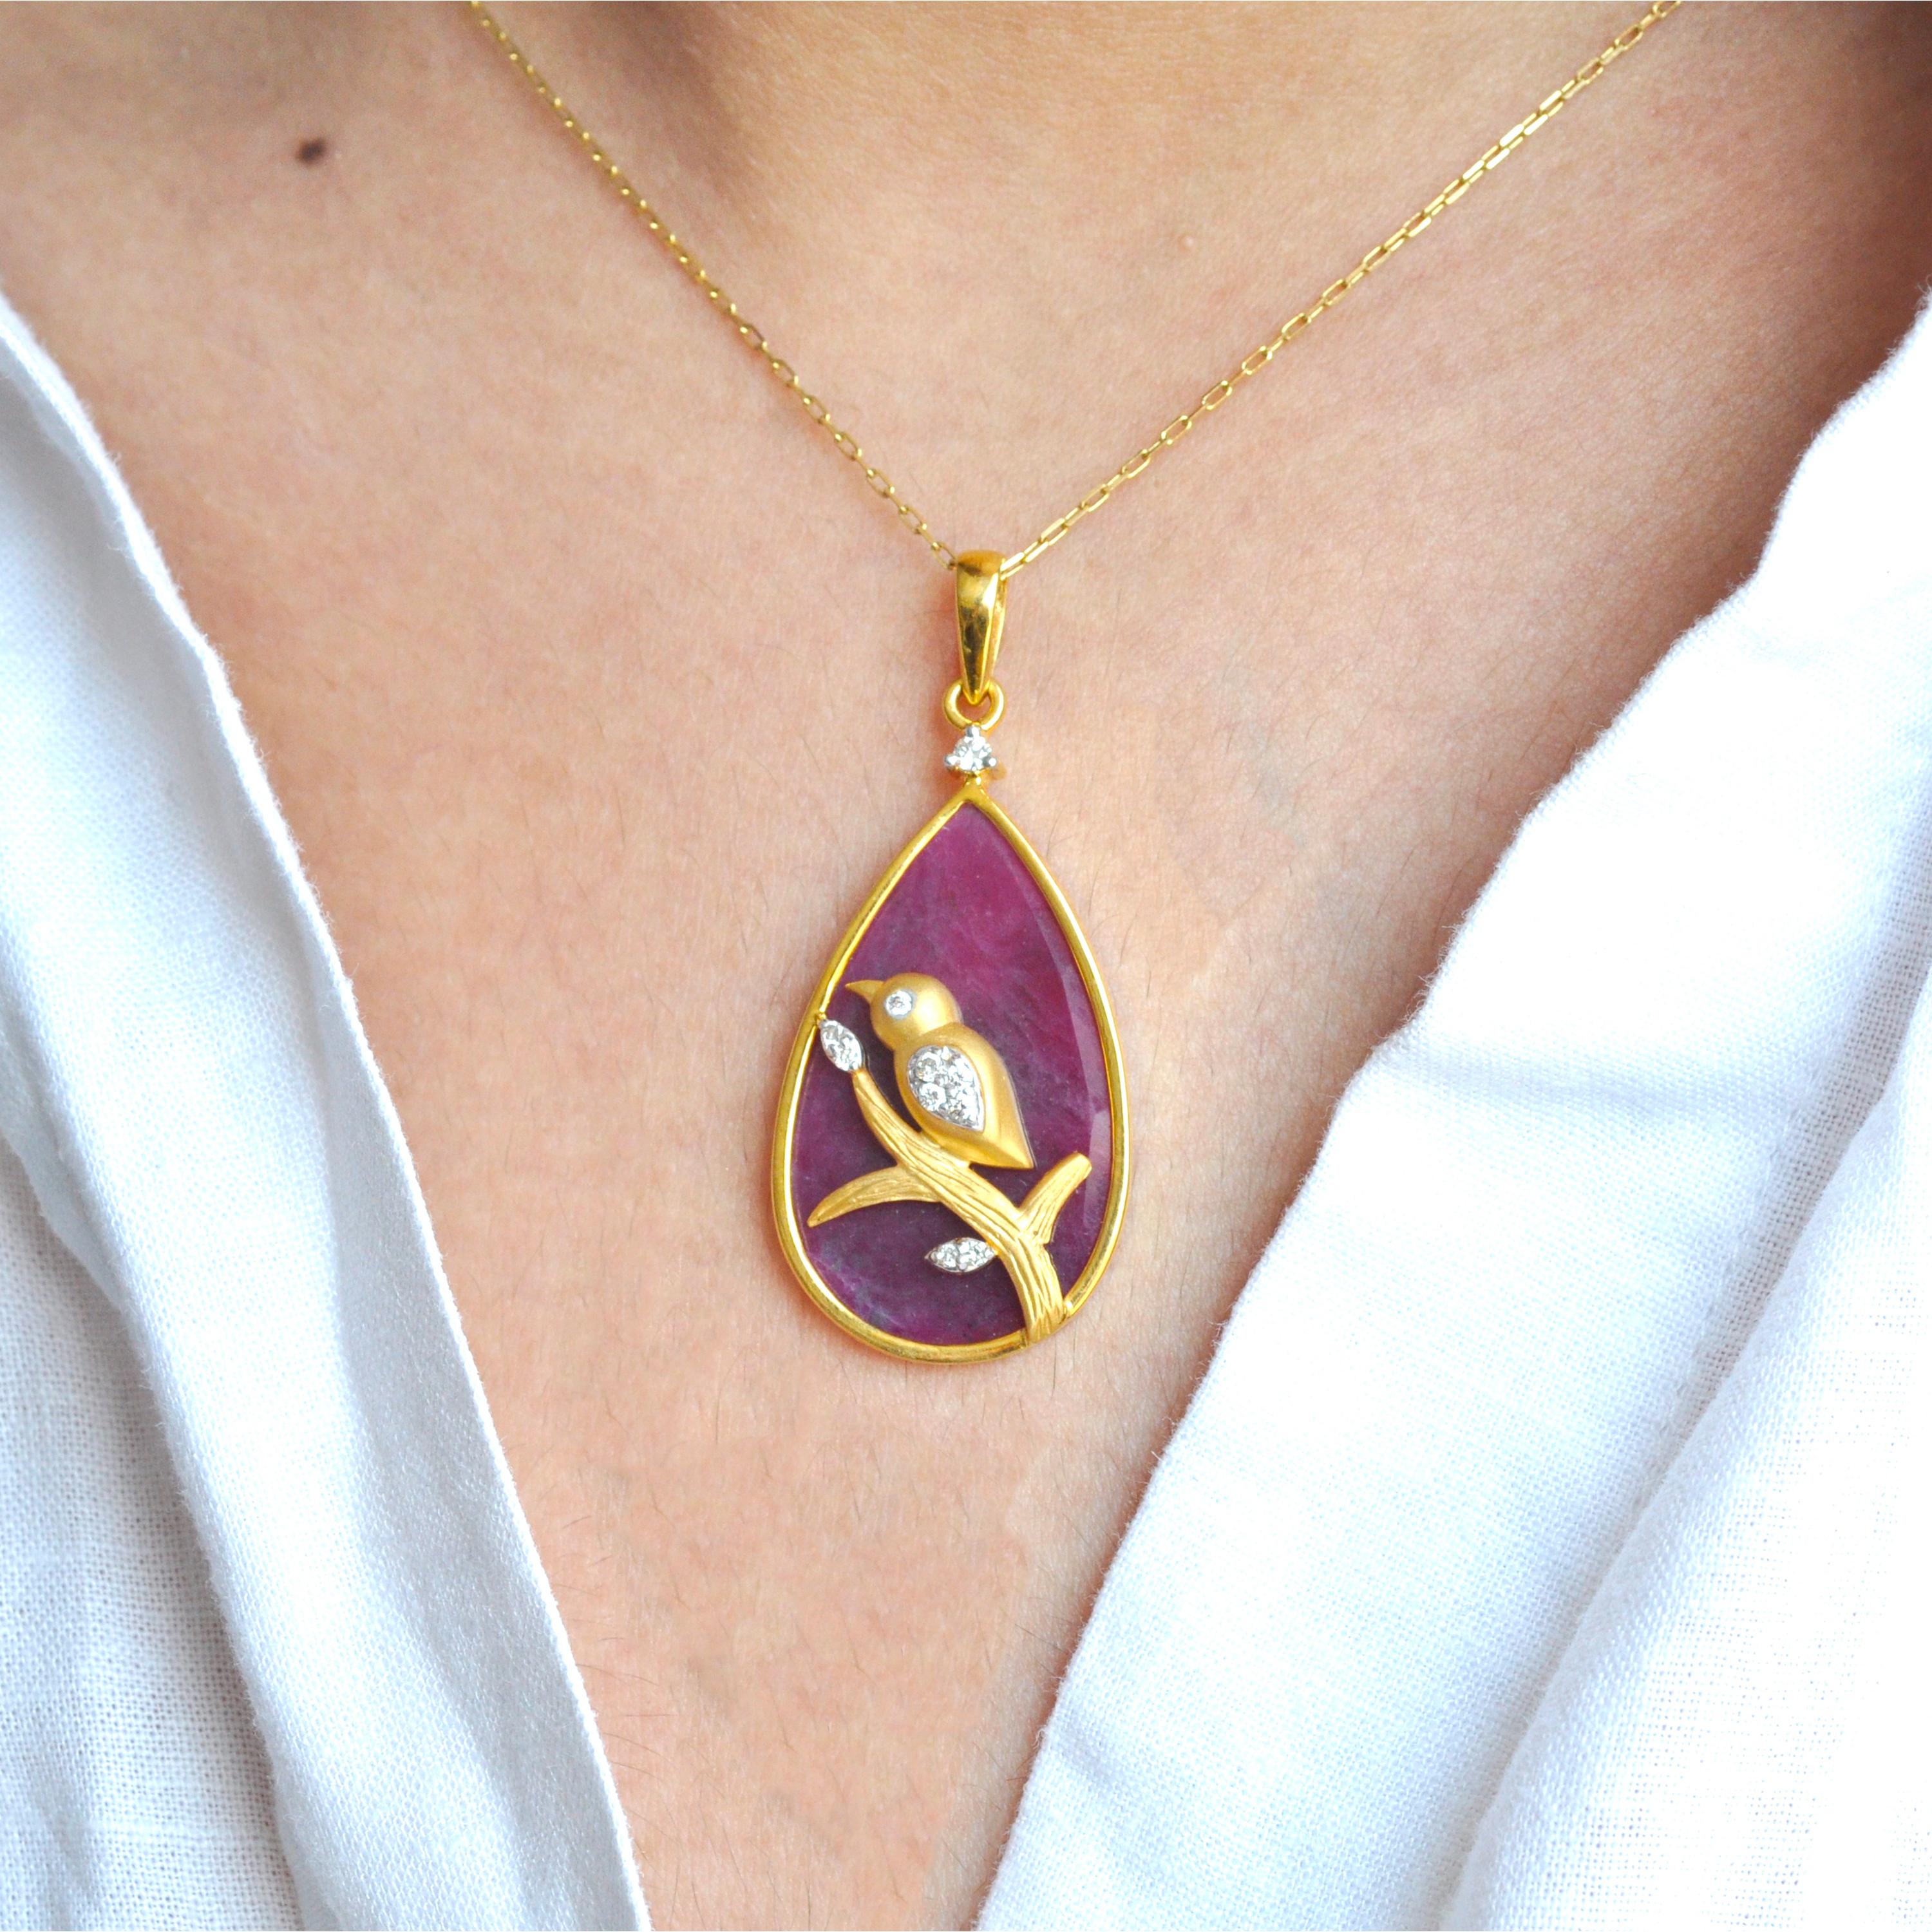 18K yellow gold reversible natural african ruby diamond bird pendant necklace

At its heart lies a resplendent pear-shaped ruby, its deep crimson hue captivating the eye with its intense brilliance. Held securely in place by an 18K gold collet, the